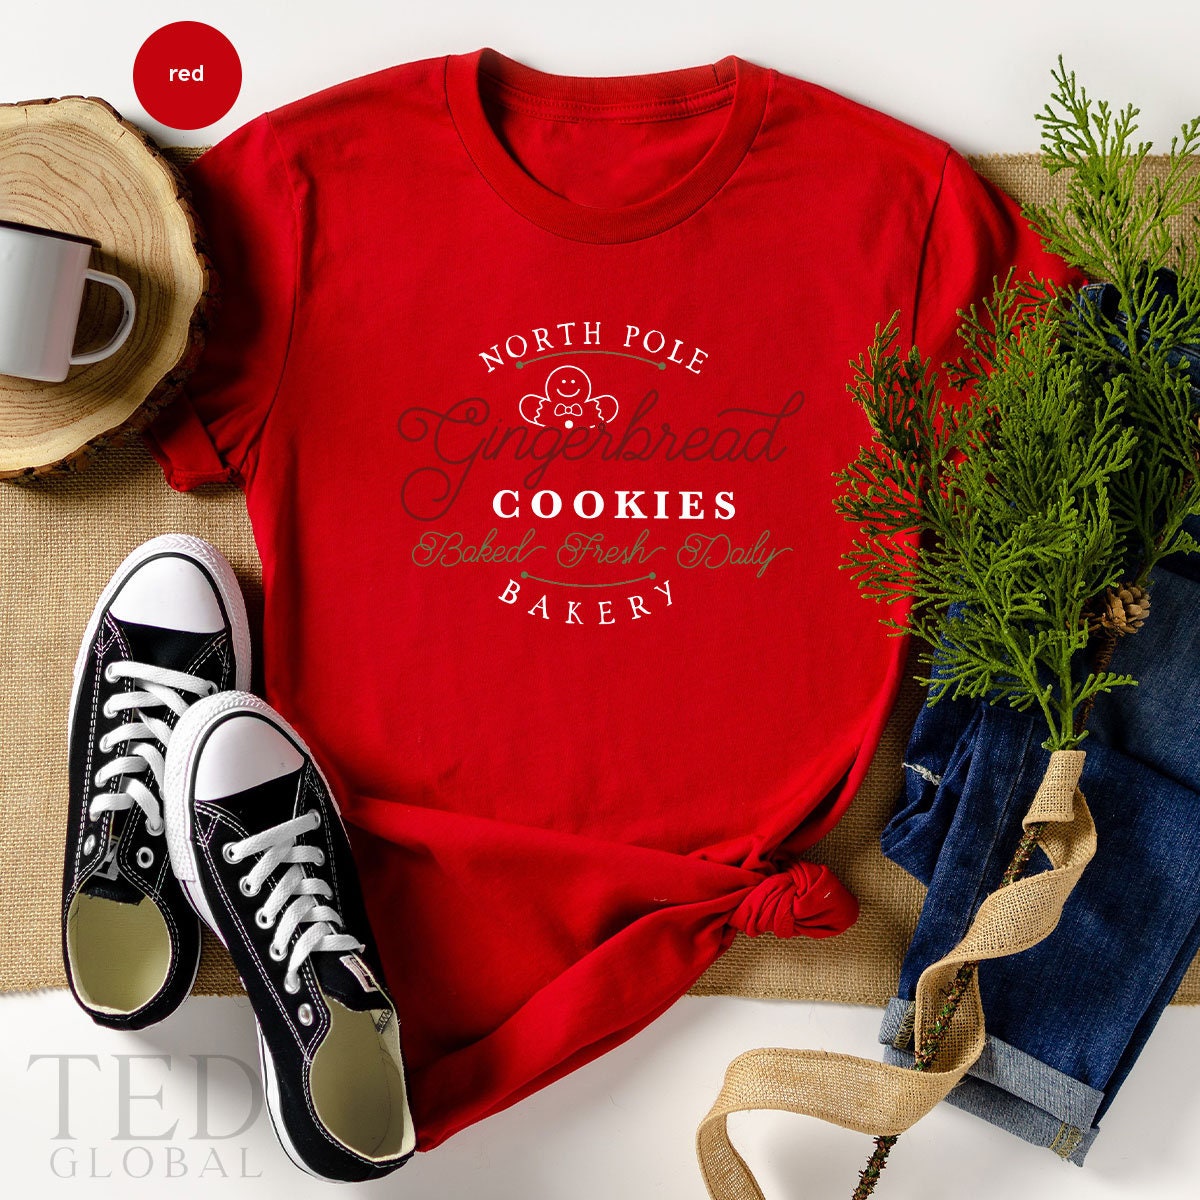 Cute North Pole Cookie Bakery T-Shirt, Happy Christmas T Shirt, Funny Gingerbread Shirts, Baked Fresh Daily Shirt, Gift  For Christmas - Fastdeliverytees.com